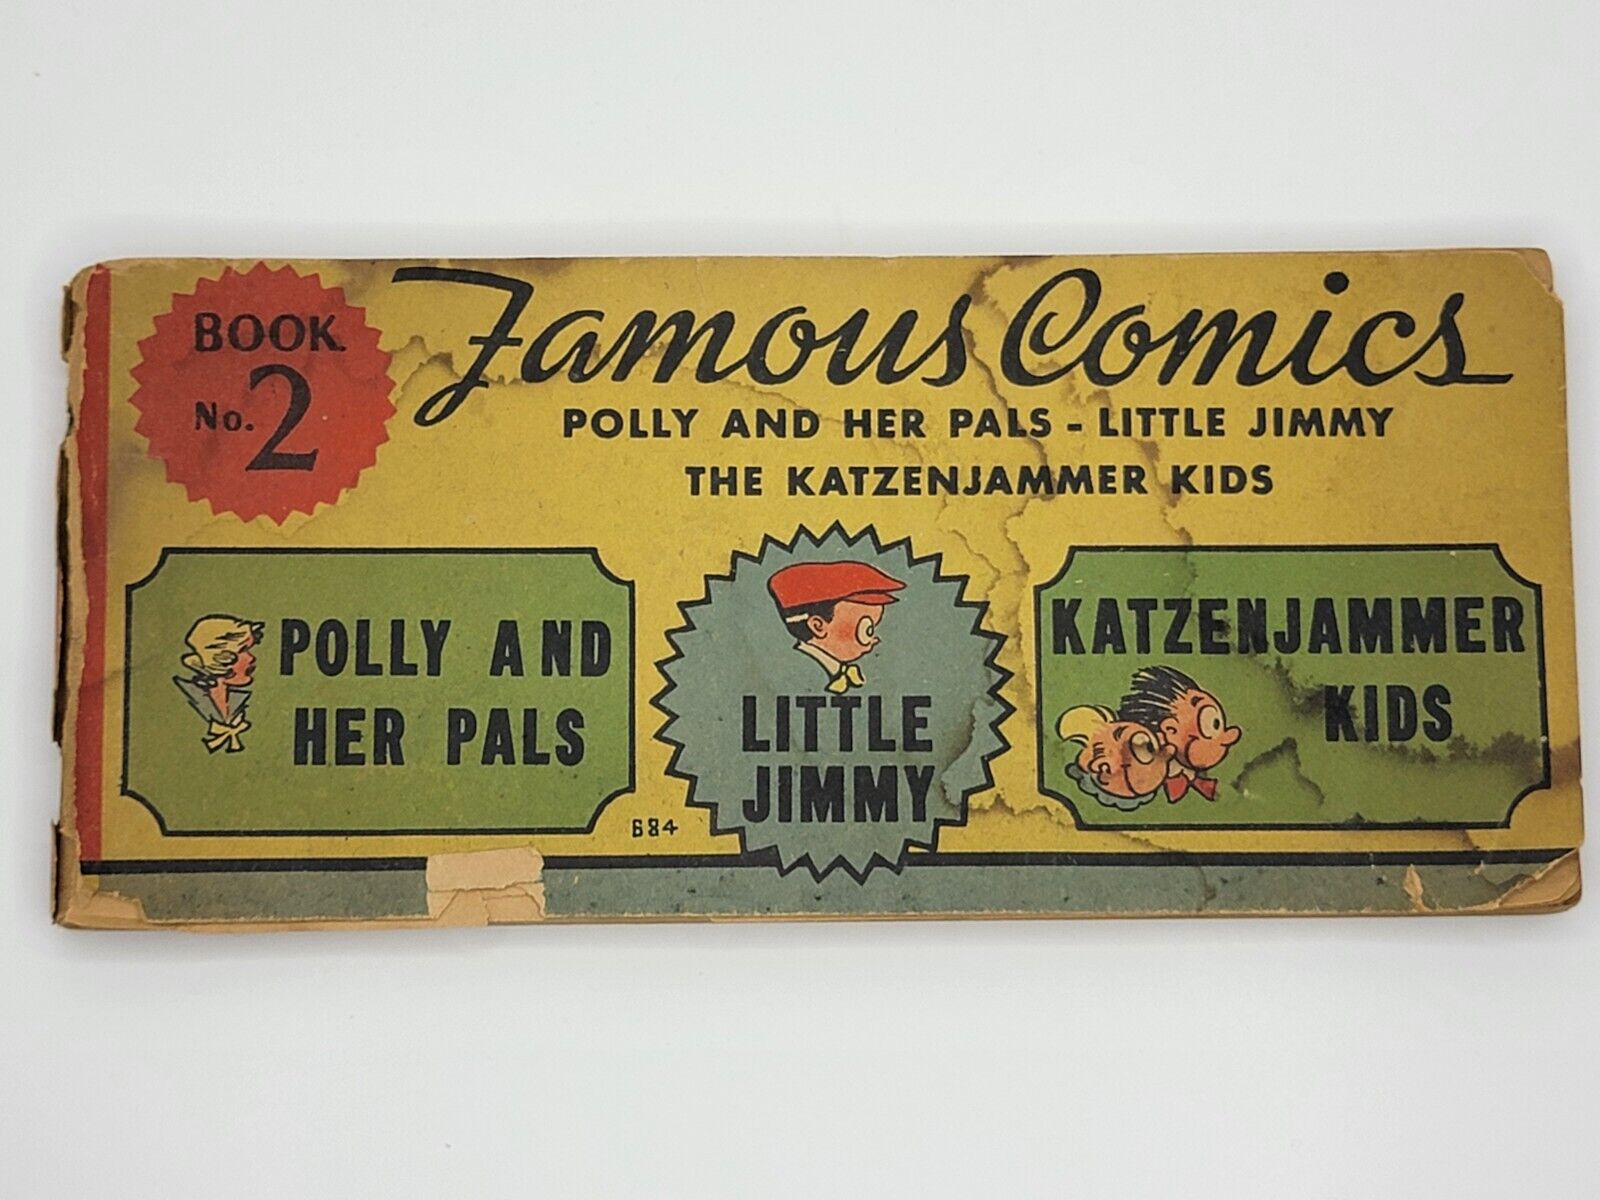 RARE 1934 Polly and Her Pals FULL comic strip book #2 Katzenjammer Little Jimmy